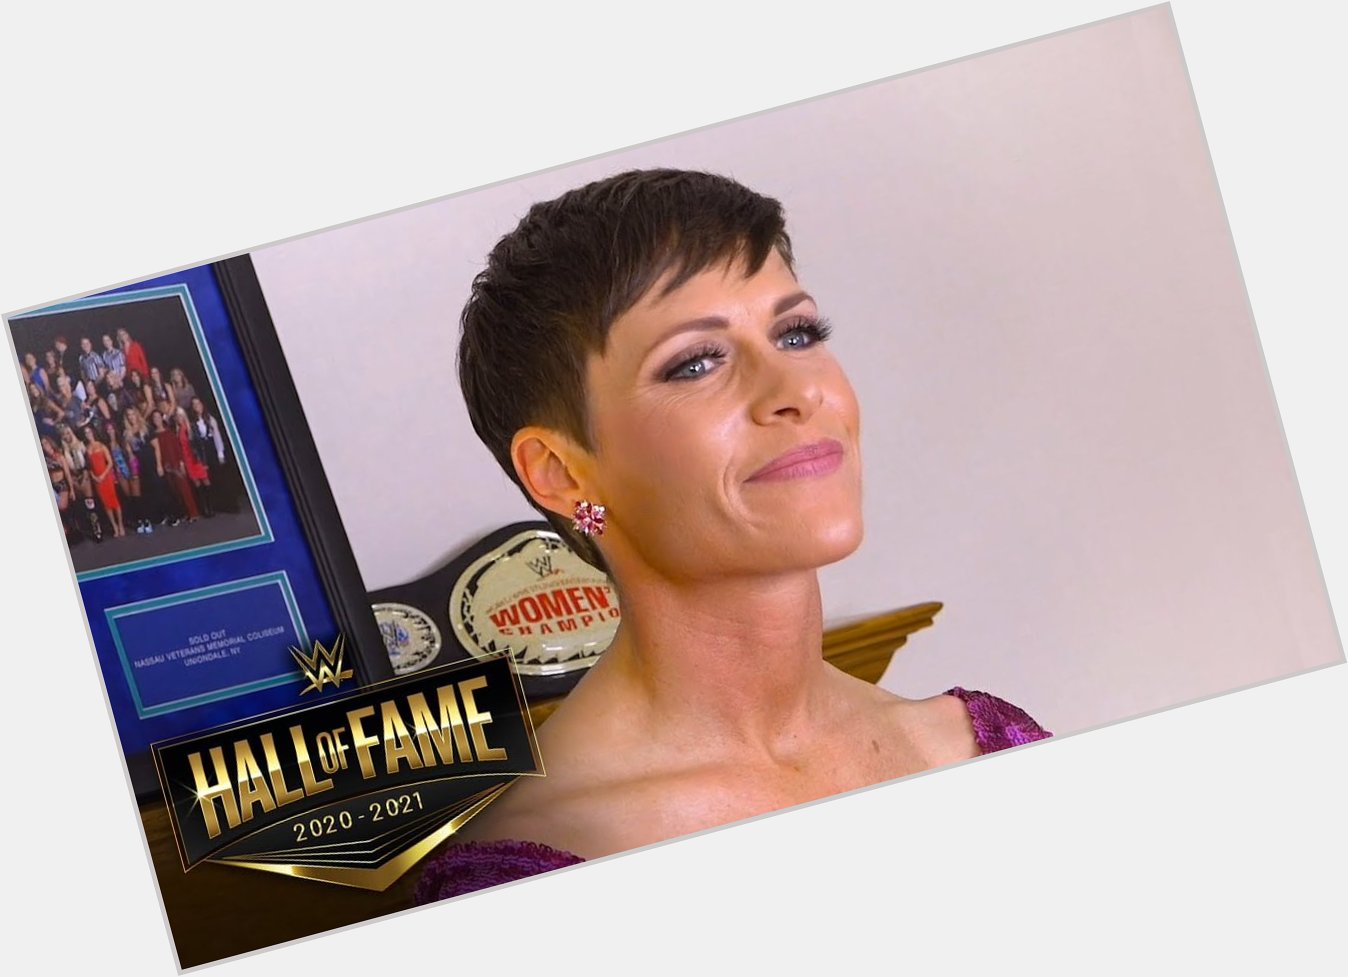 The AMP Crew would like to wish Hall Of Famer Molly Holly (44) a happy birthday! 